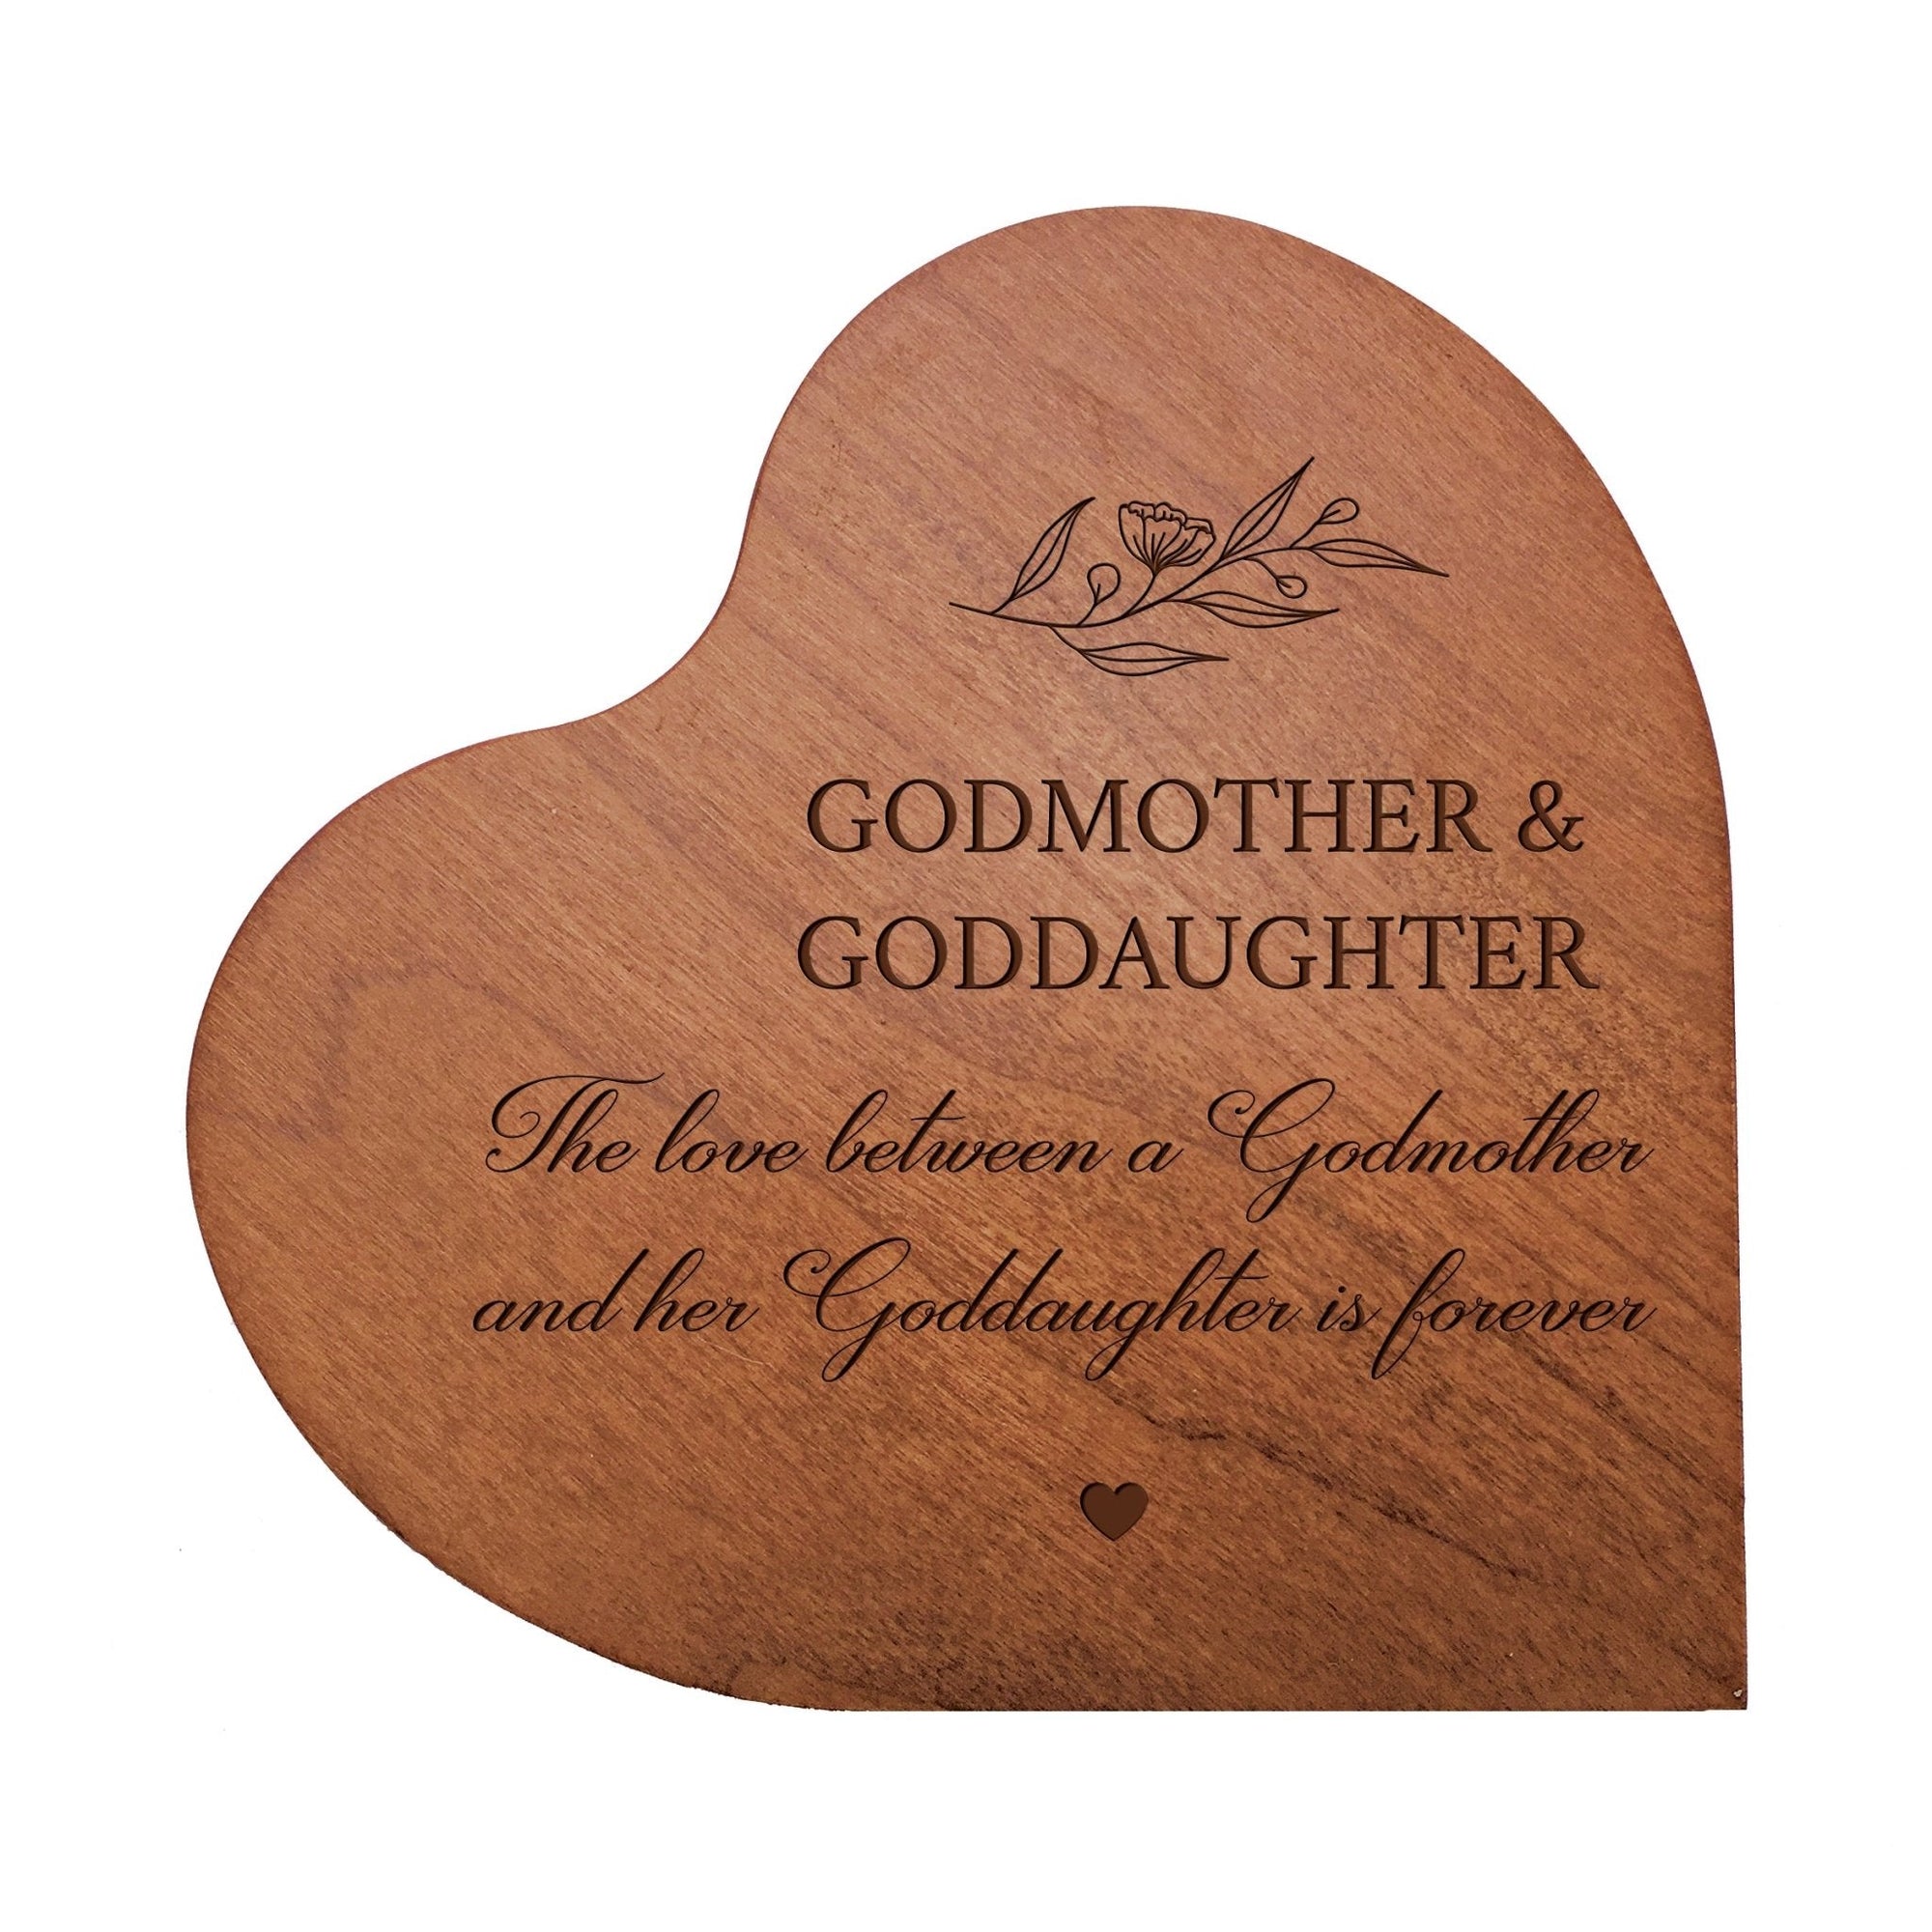 Modern Godmother’s Love Solid Wood Heart Decoration With Inspirational Verse Keepsake Gift 5x5.25 - Godmother & Goddaughter - LifeSong Milestones